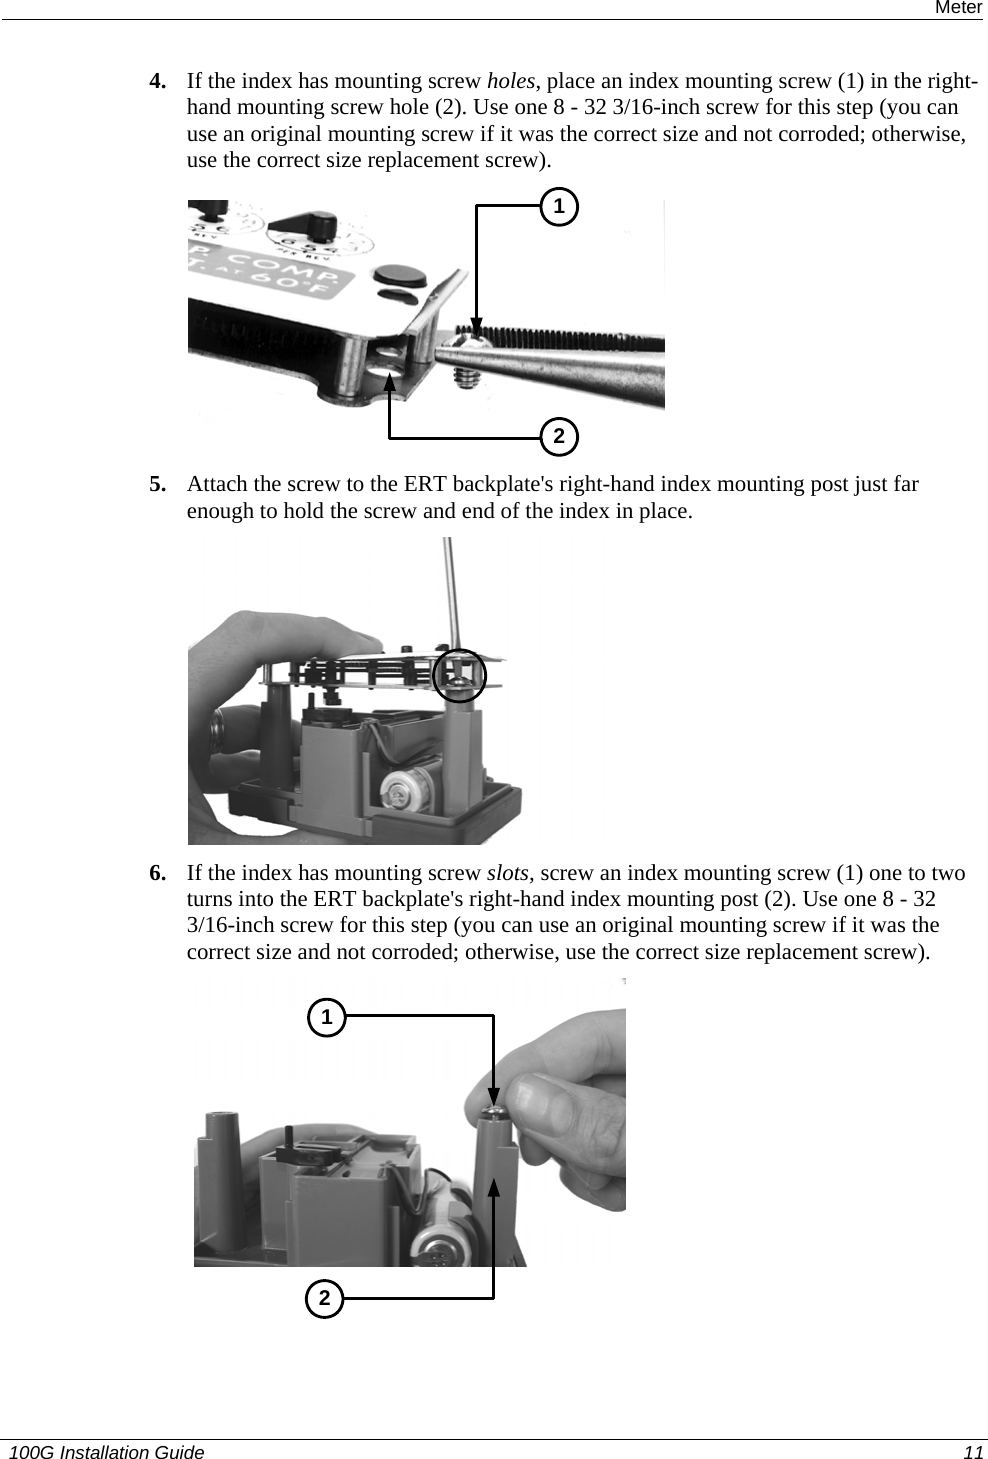  Installing the 100G on an American Meter 4. If the index has mounting screw holes, place an index mounting screw (1) in the right-hand mounting screw hole (2). Use one 8 - 32 3/16-inch screw for this step (you can use an original mounting screw if it was the correct size and not corroded; otherwise, use the correct size replacement screw).  12 5. Attach the screw to the ERT backplate&apos;s right-hand index mounting post just far enough to hold the screw and end of the index in place.   6. If the index has mounting screw slots, screw an index mounting screw (1) one to two turns into the ERT backplate&apos;s right-hand index mounting post (2). Use one 8 - 32 3/16-inch screw for this step (you can use an original mounting screw if it was the correct size and not corroded; otherwise, use the correct size replacement screw).   21  100G Installation Guide  11  